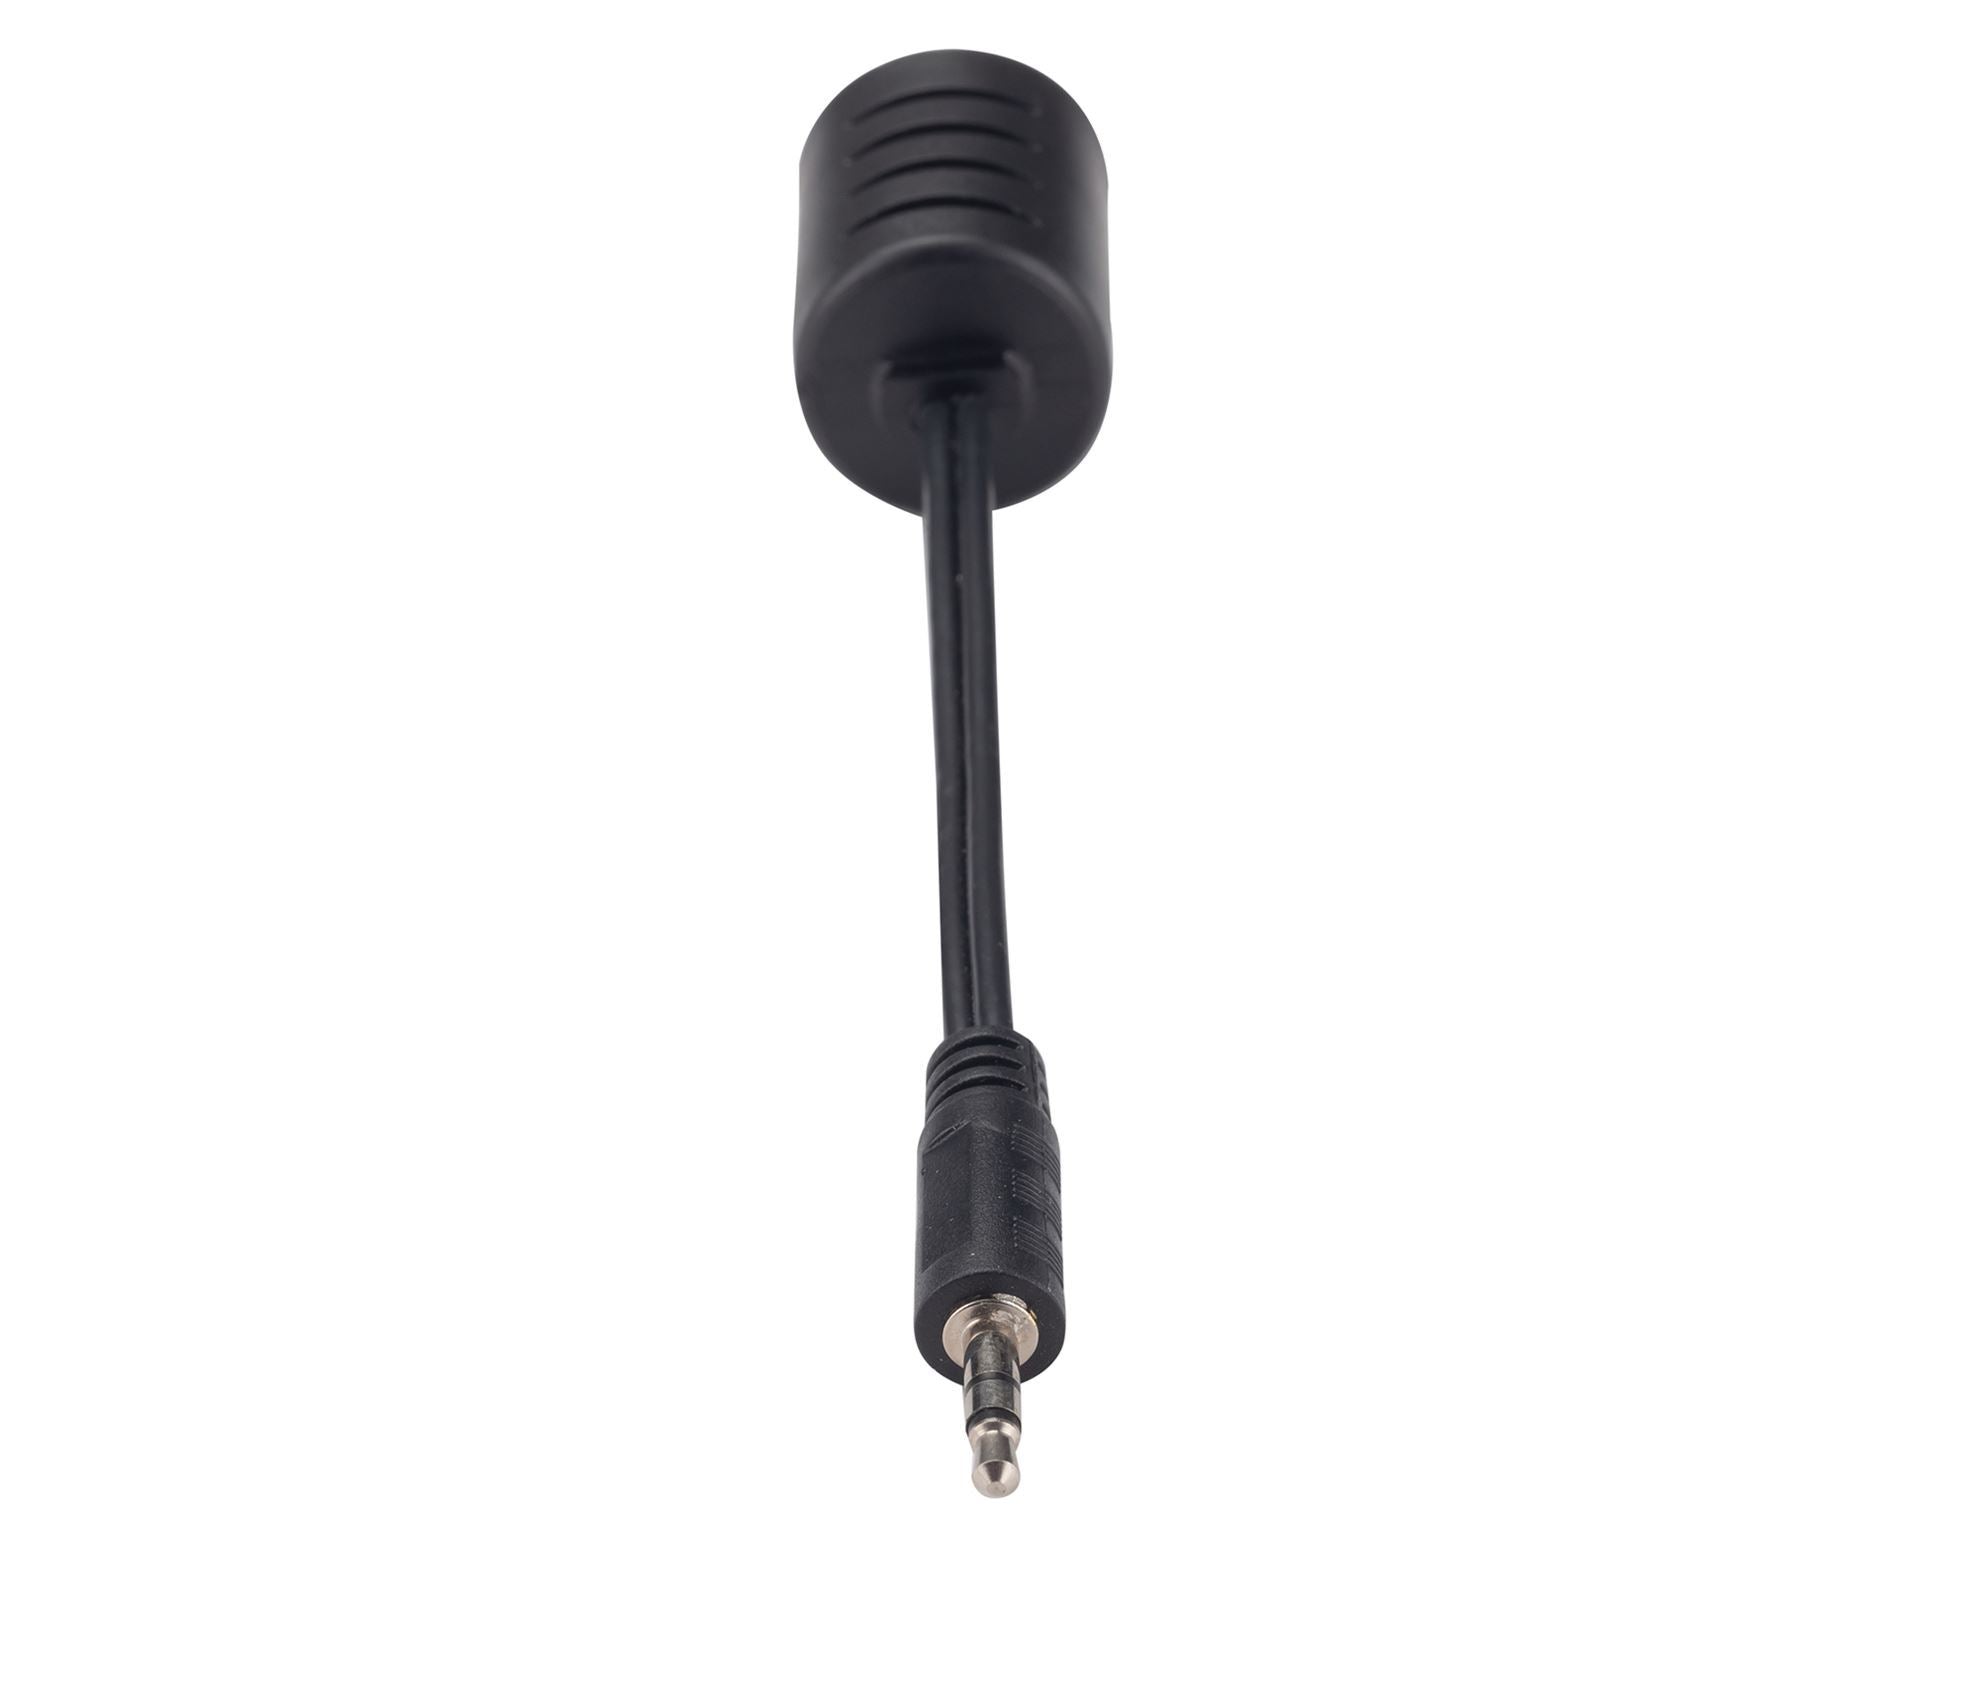 DYNAMIX_Stereo_Audio_Connector_to_RJ45_Balun_&_2x_RCA_Connectors_to_RJ45_Balun._Max_Distance_50m,_Sold_as_a_Pair. 173